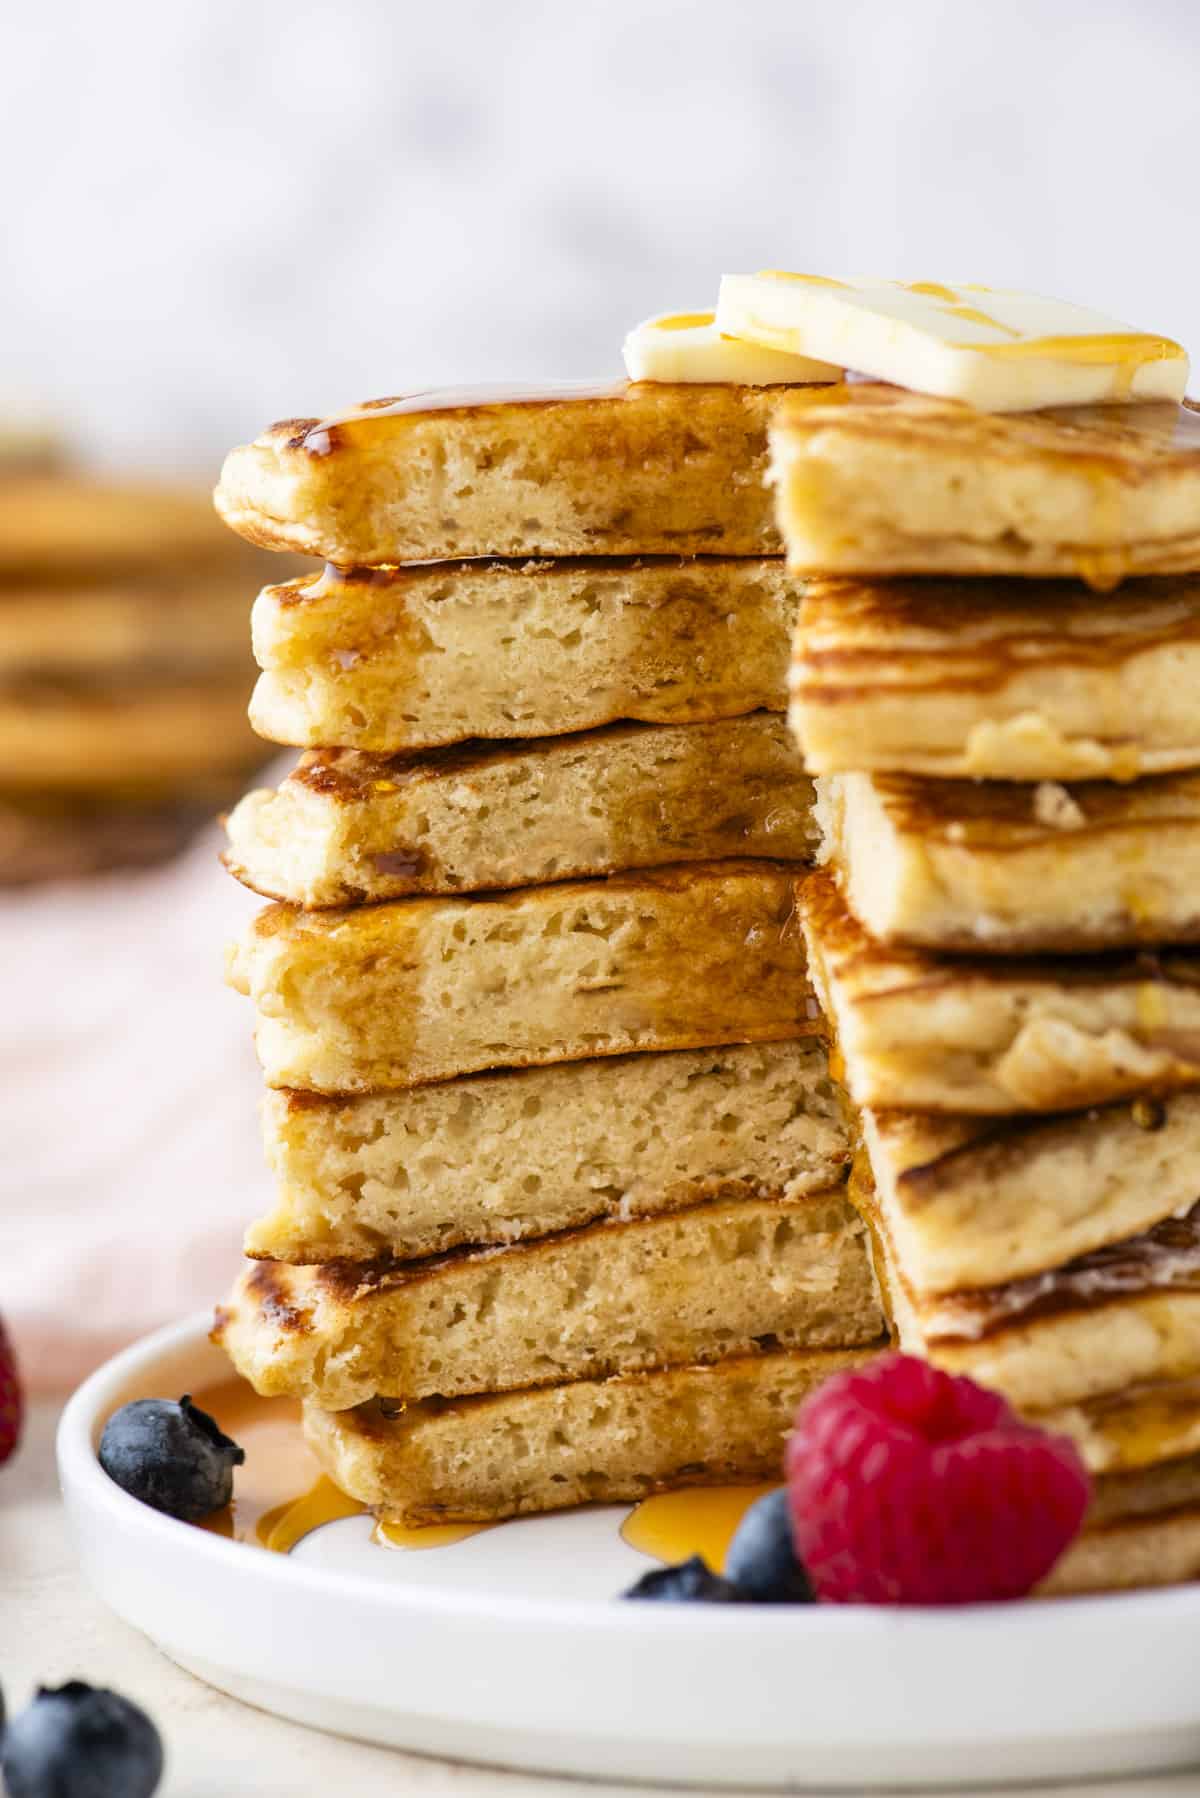 a tall stack of pancakes with a triangular portion cut out of the entire stack, drizzled with syrup, topped with a slice of butter and surrounded by fresh berries on a white plate